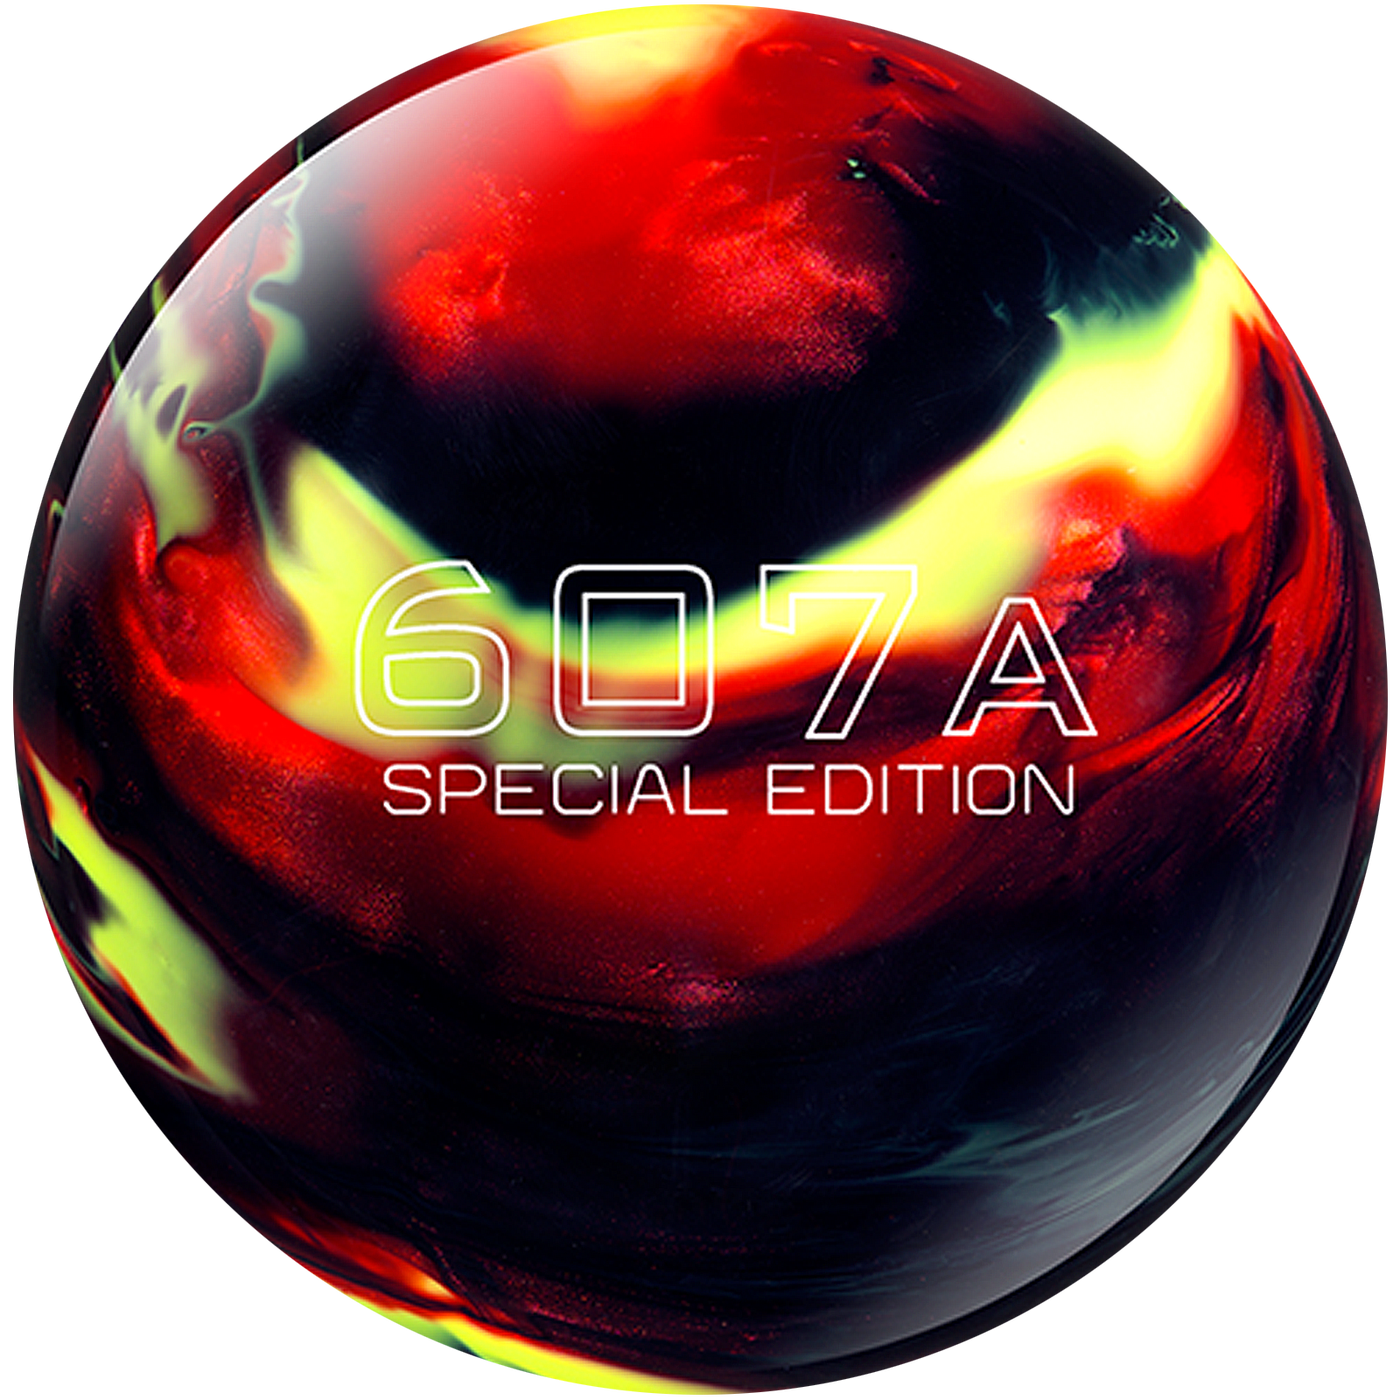 607A Special Edition Bowling Ball